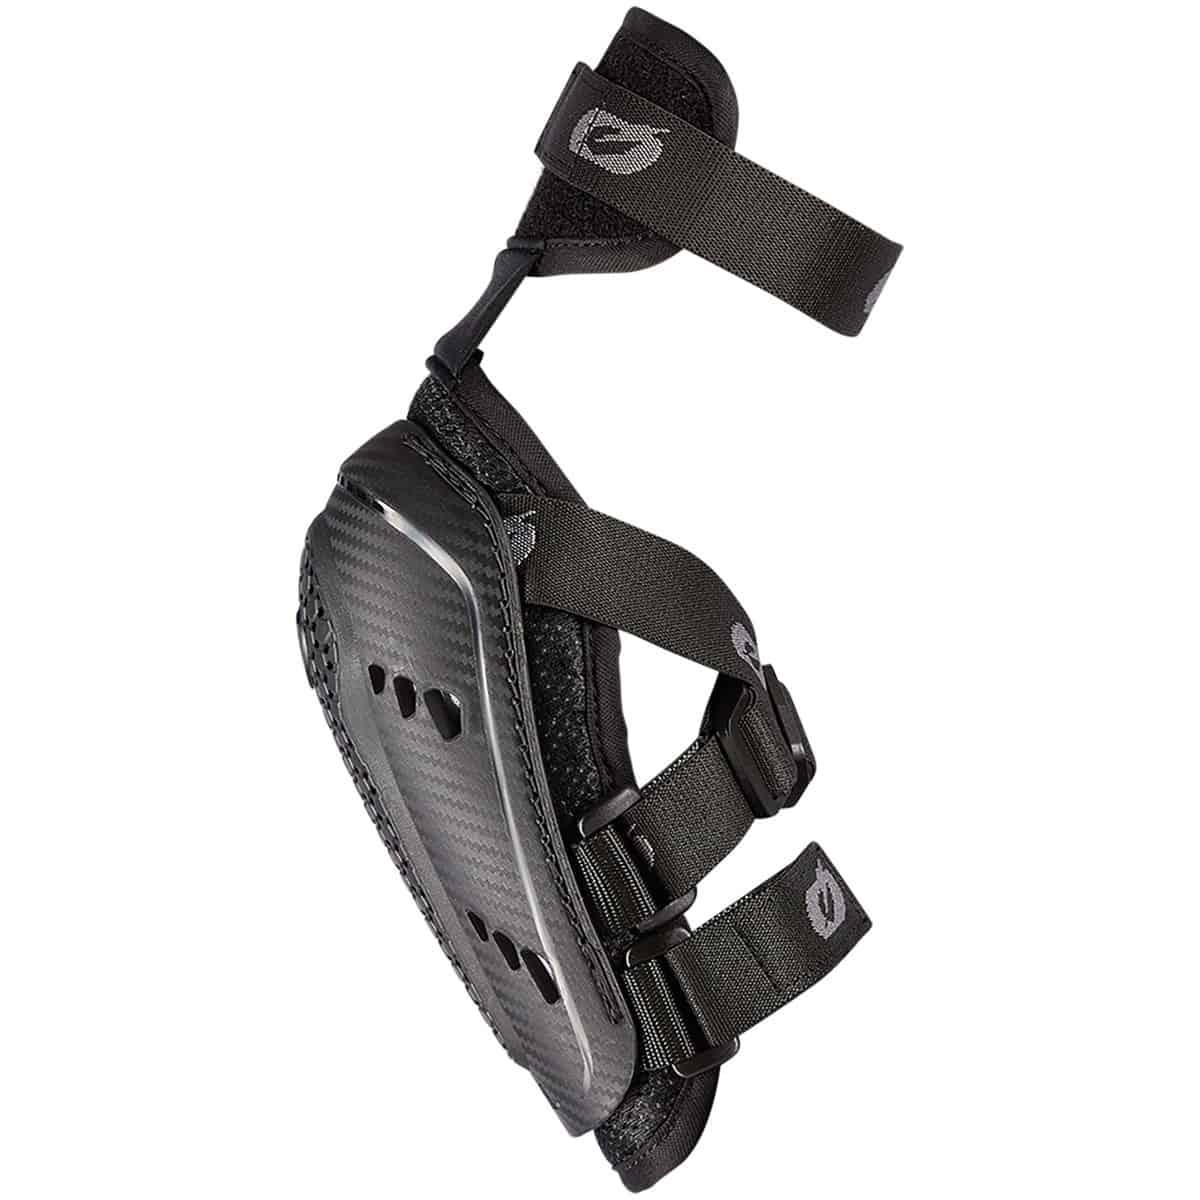 Comfortable elbow armour which takes care of impact protection when riding off road-2